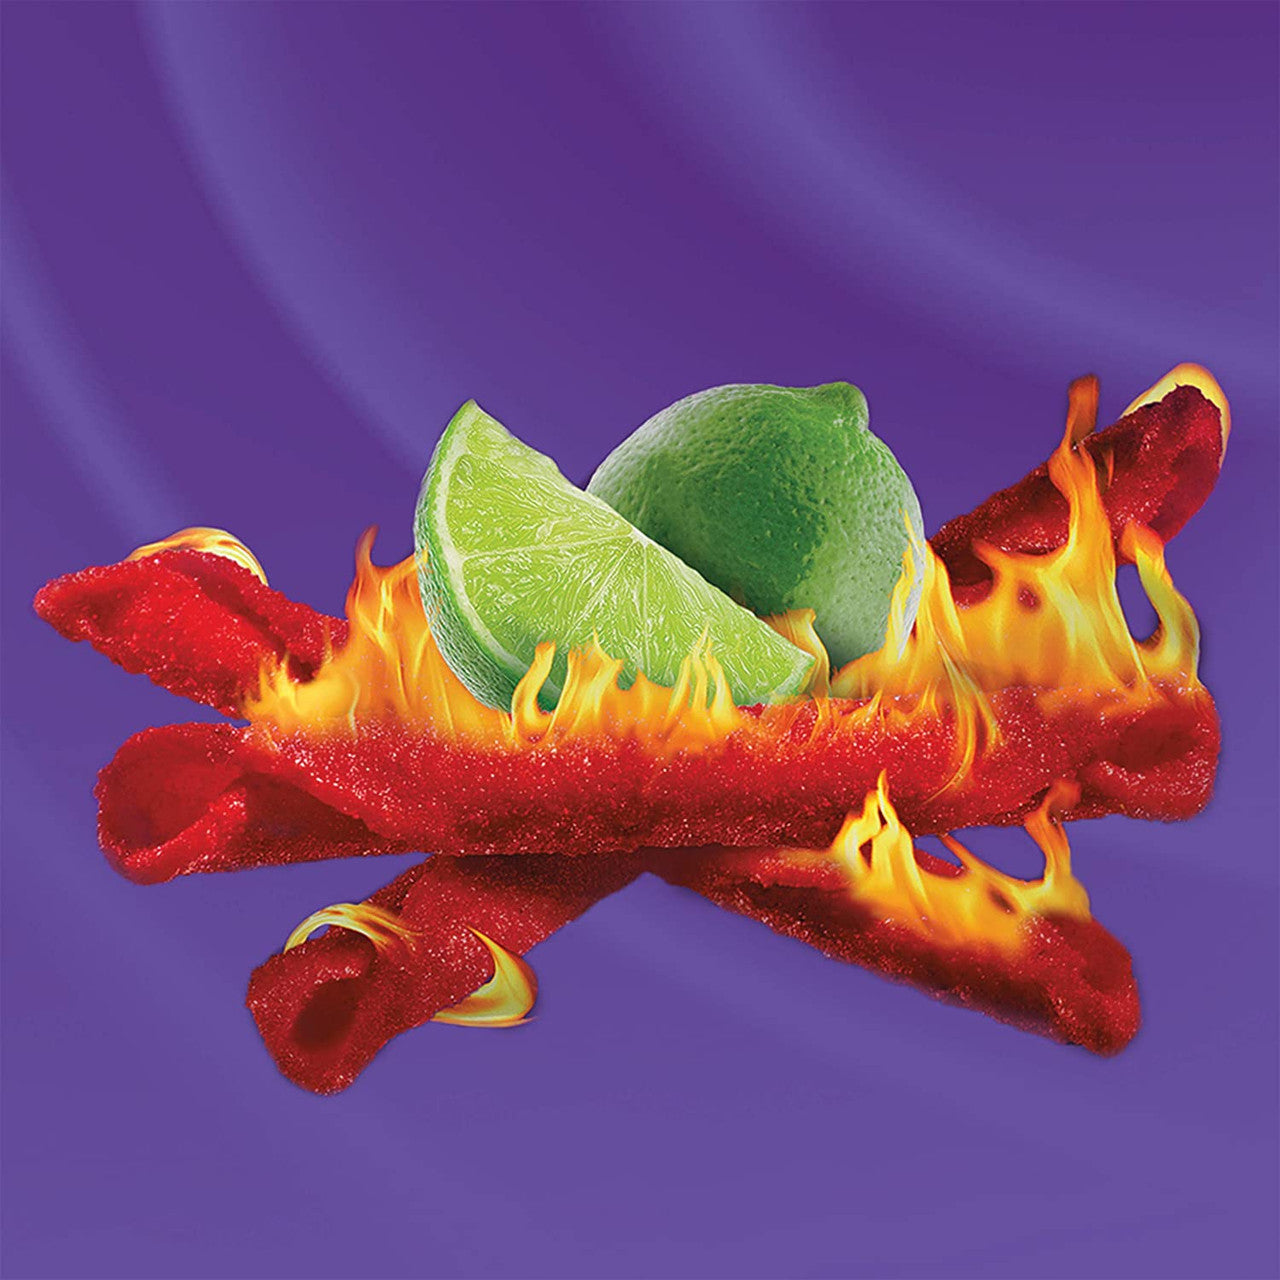 Takis Fuego Tortilla Hot Chili & Lime Chips 9.9 oz